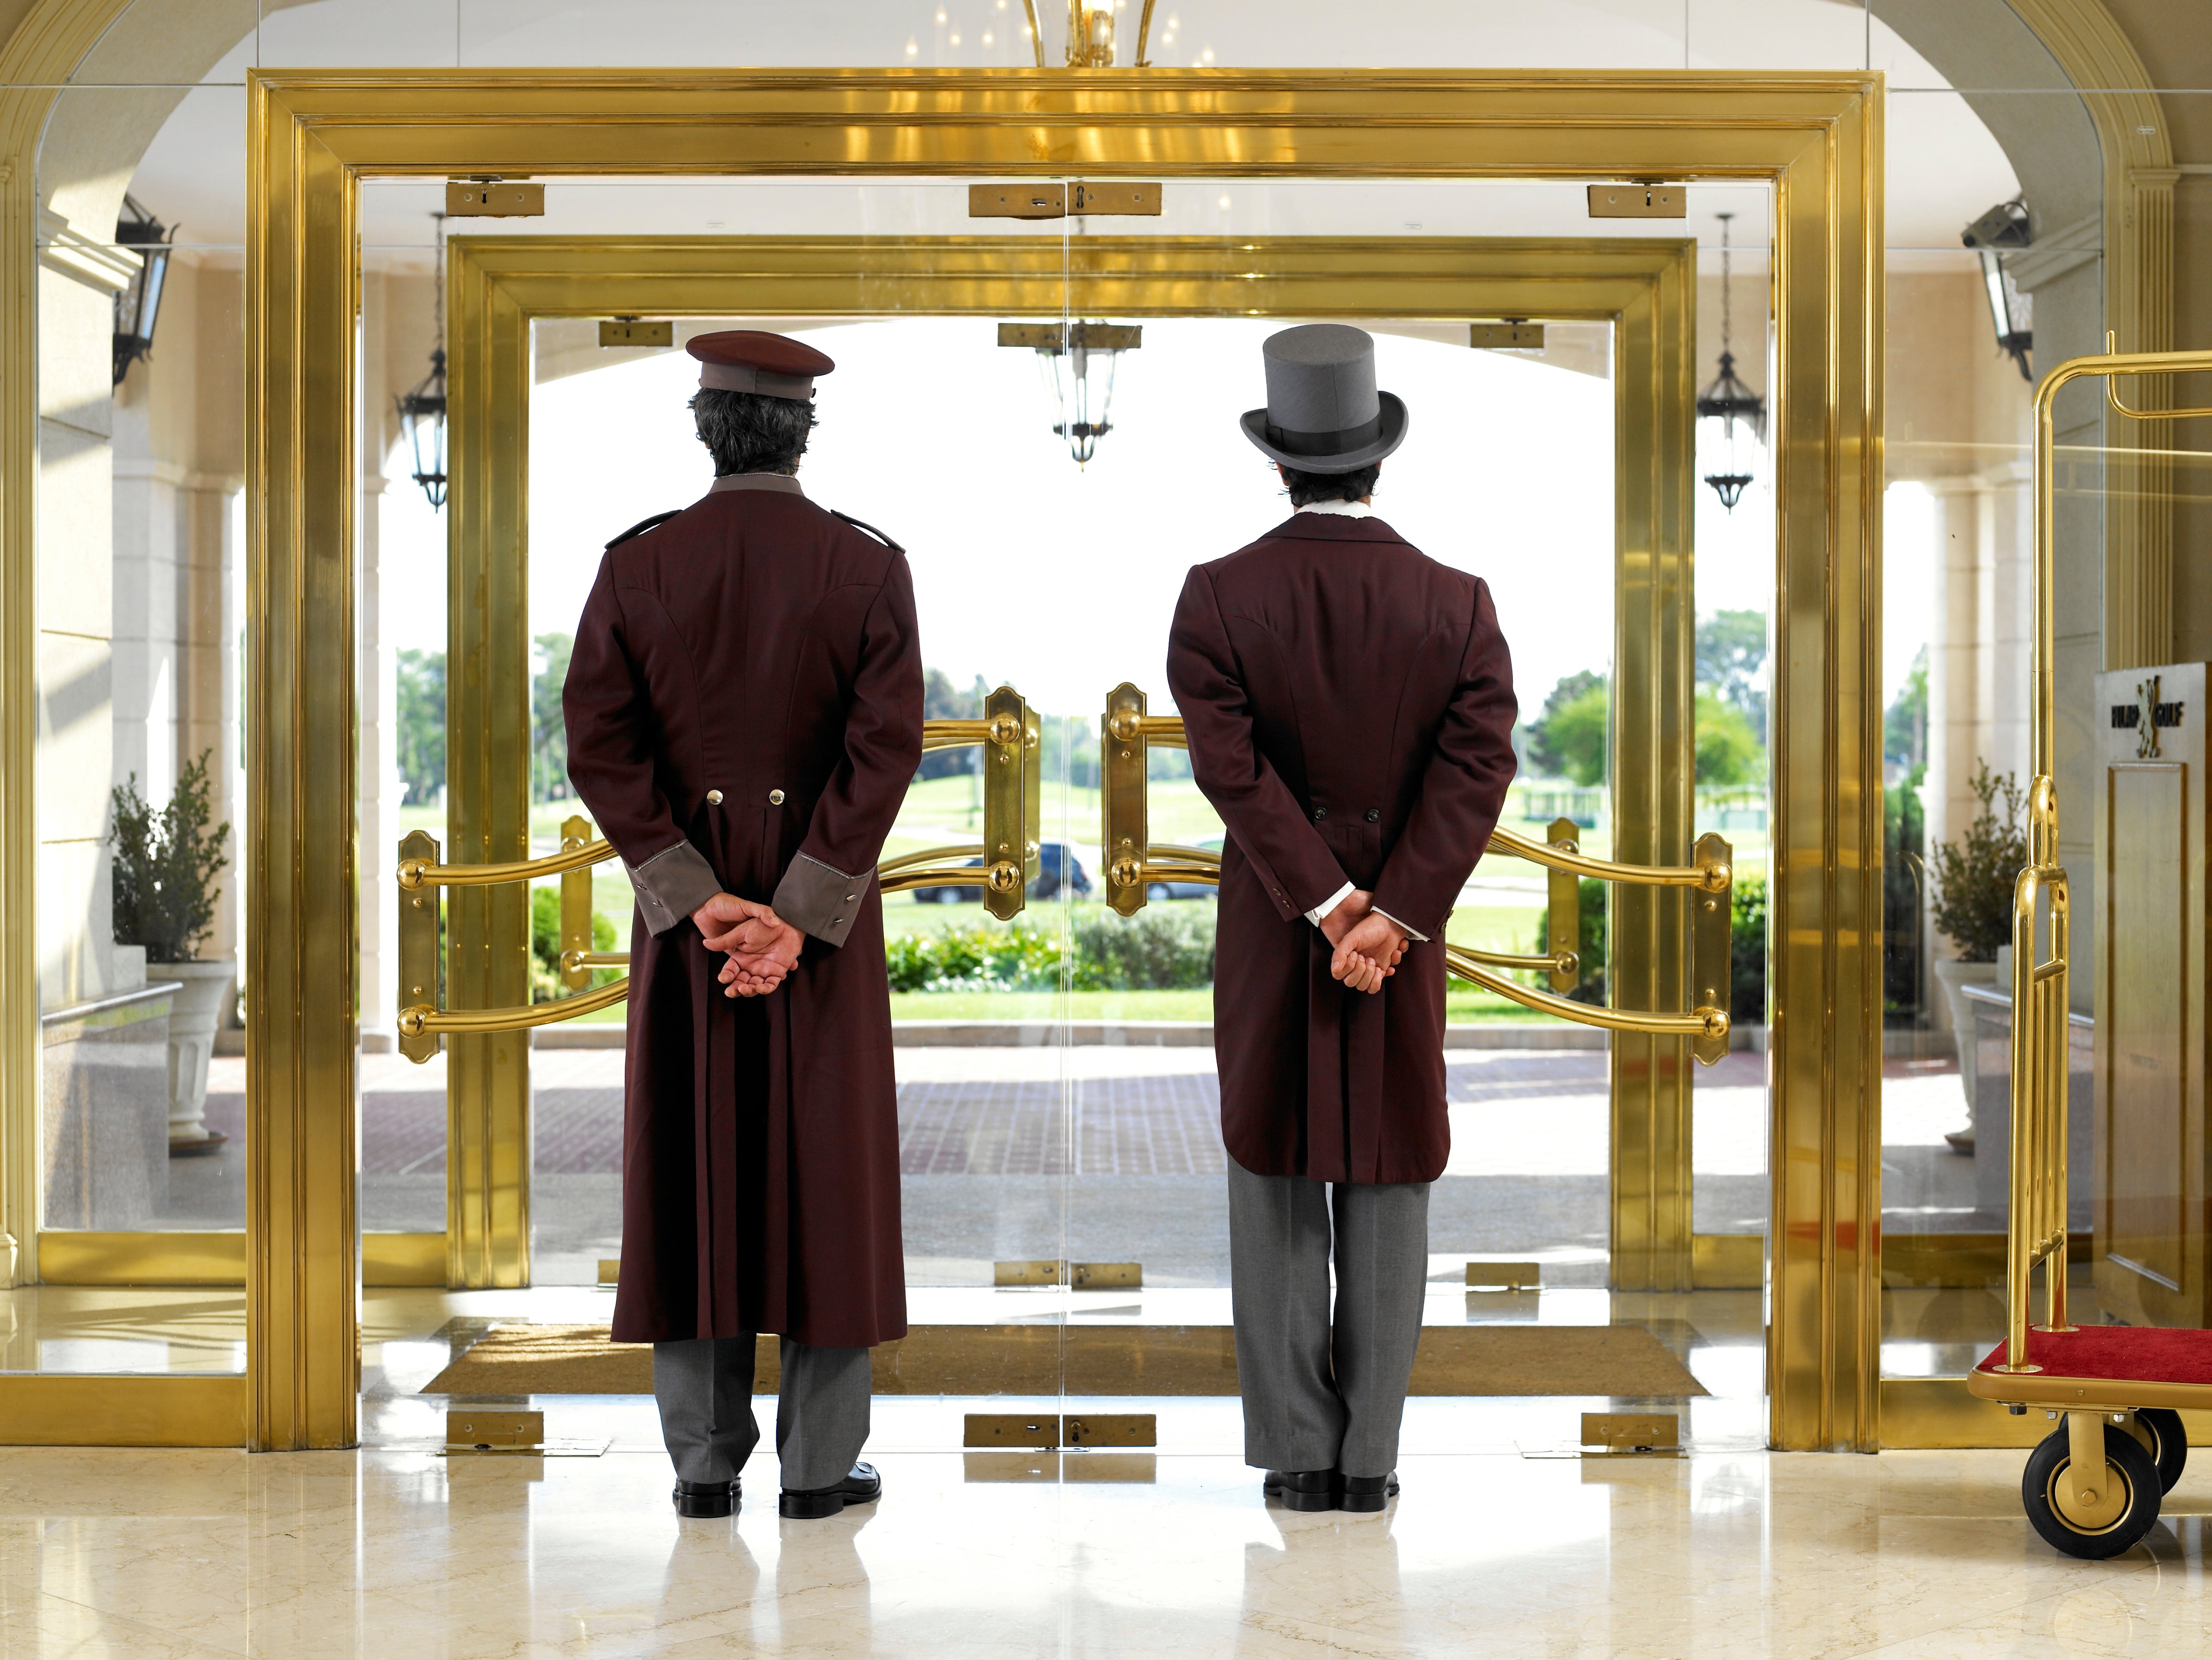 Concierge and bellboy standing at hotel entrance